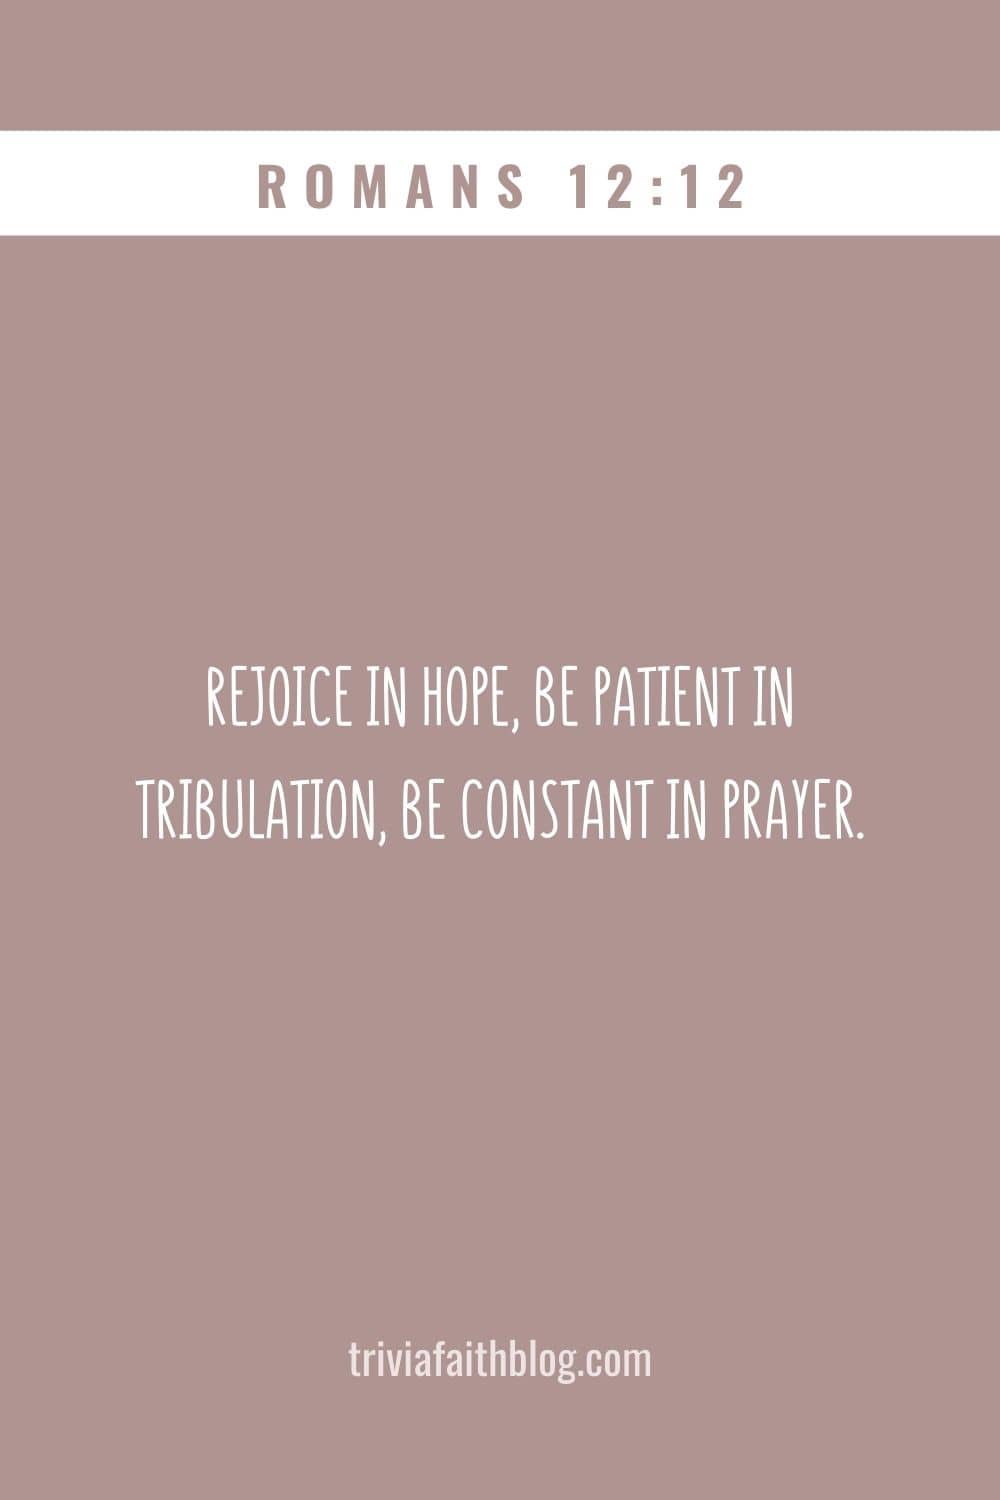 Rejoice in hope, be patient in tribulation, be constant in prayer